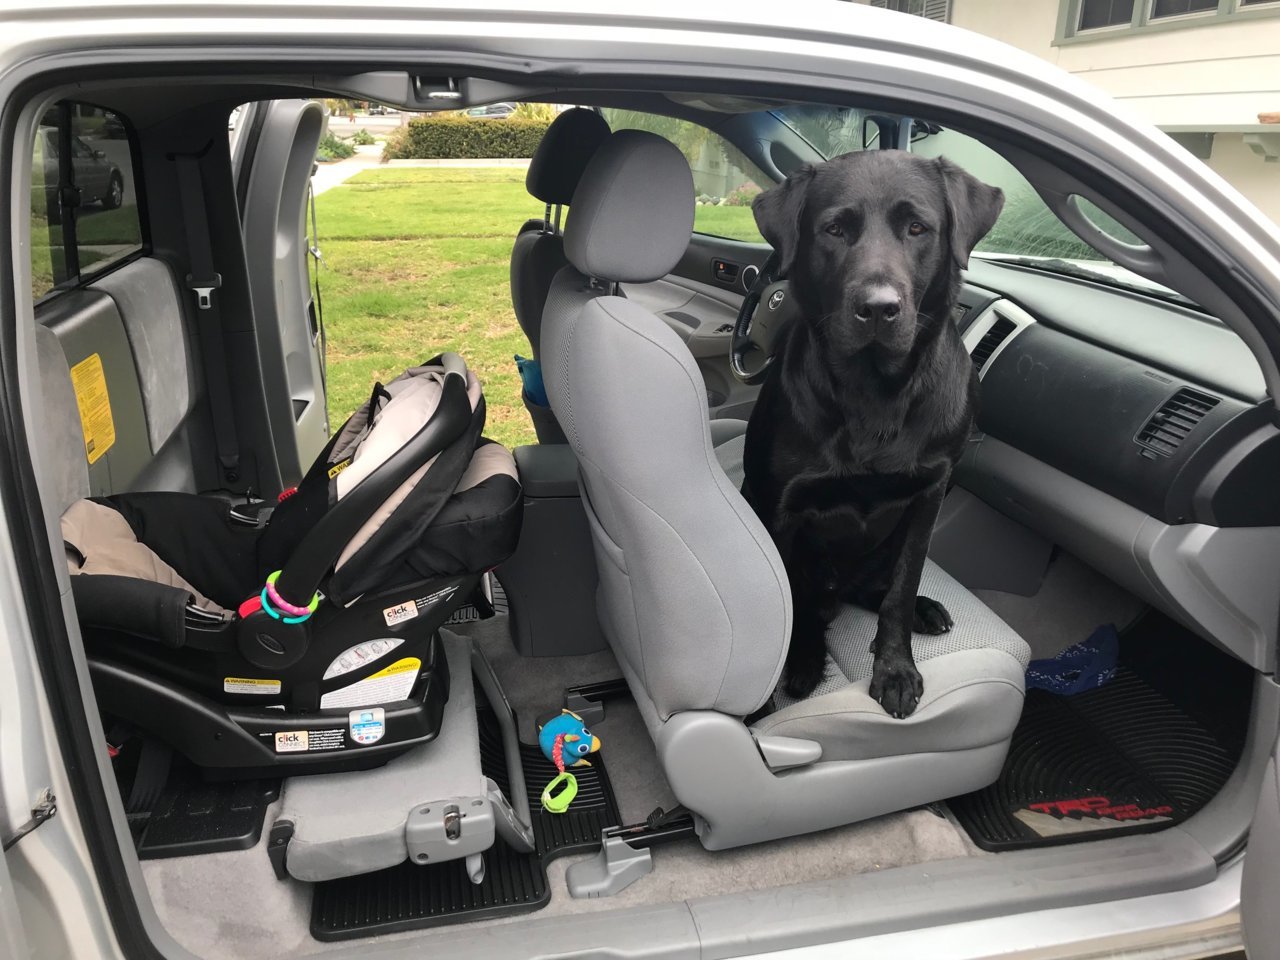 Rear Facing Car Seat In Access Cab, Can You Put A Baby Seat In Toyota Tacoma Access Cab